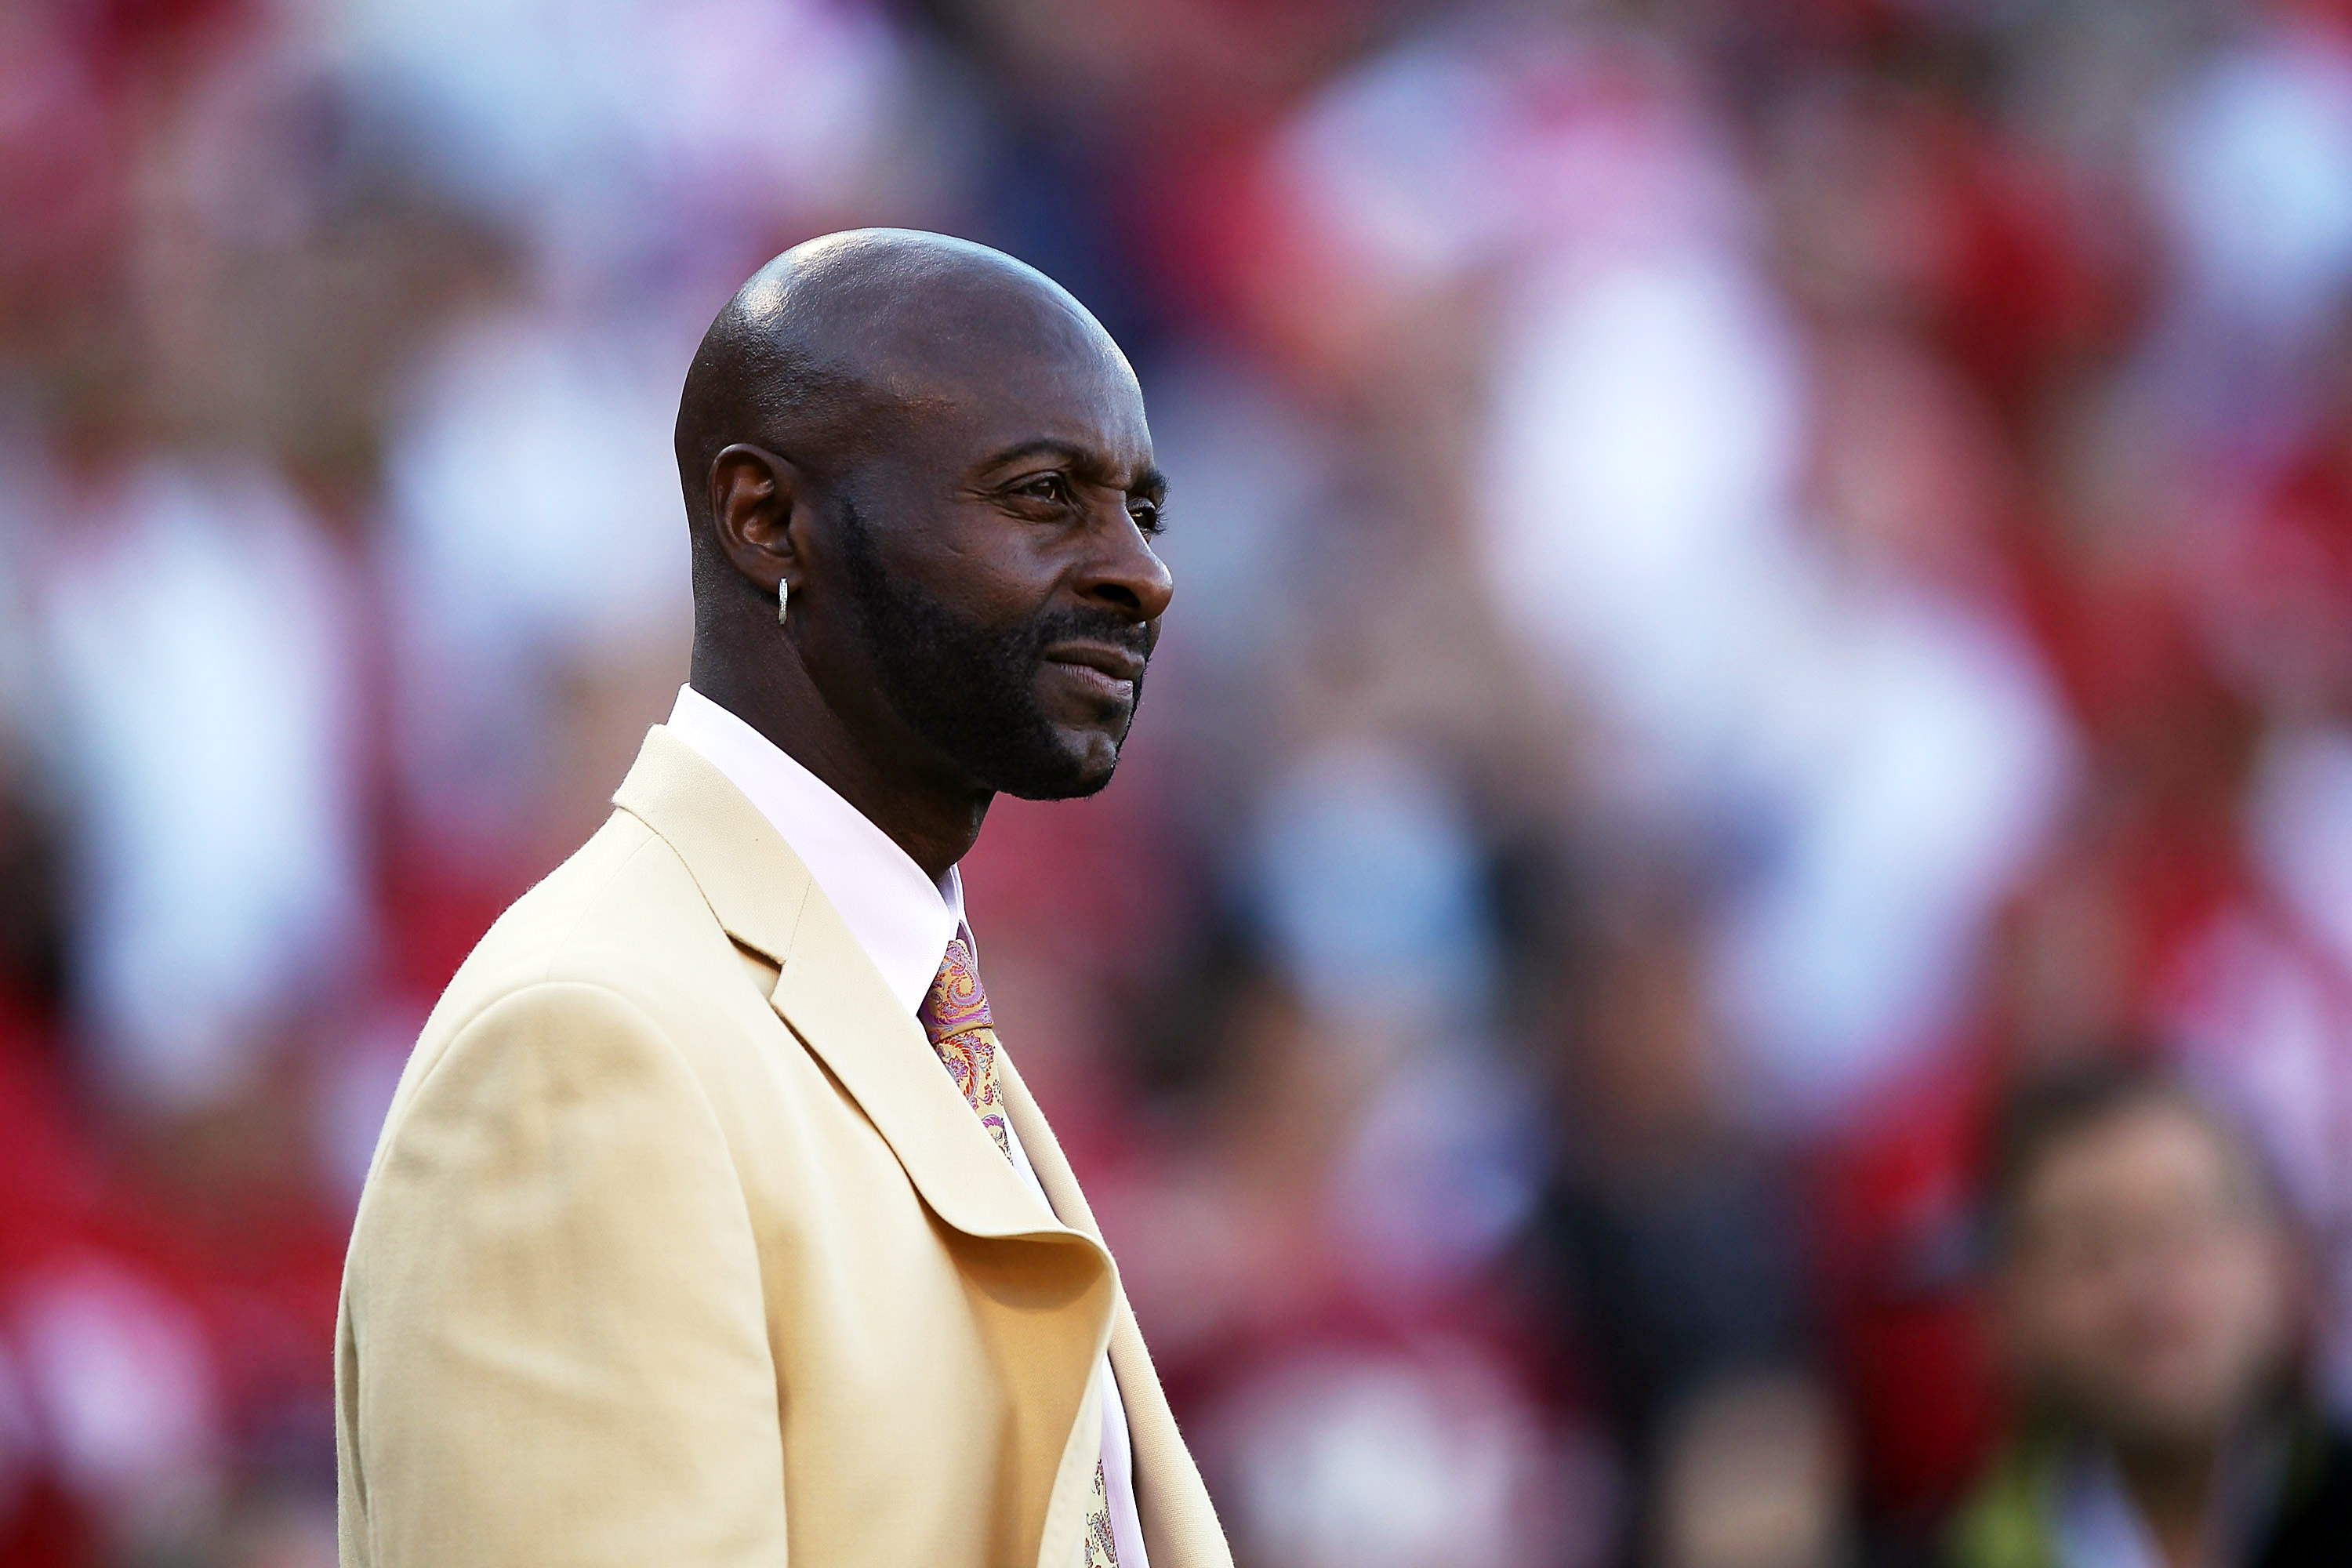 SAN FRANCISCO - SEPTEMBER 20:  Former member of the San Francisco 49ers Jerry Rice looks on against the New Orleans Saints during an NFL game at Candlestick Park on September 20, 2010 in San Francisco, California.  (Photo by Jed Jacobsohn/Getty Images)